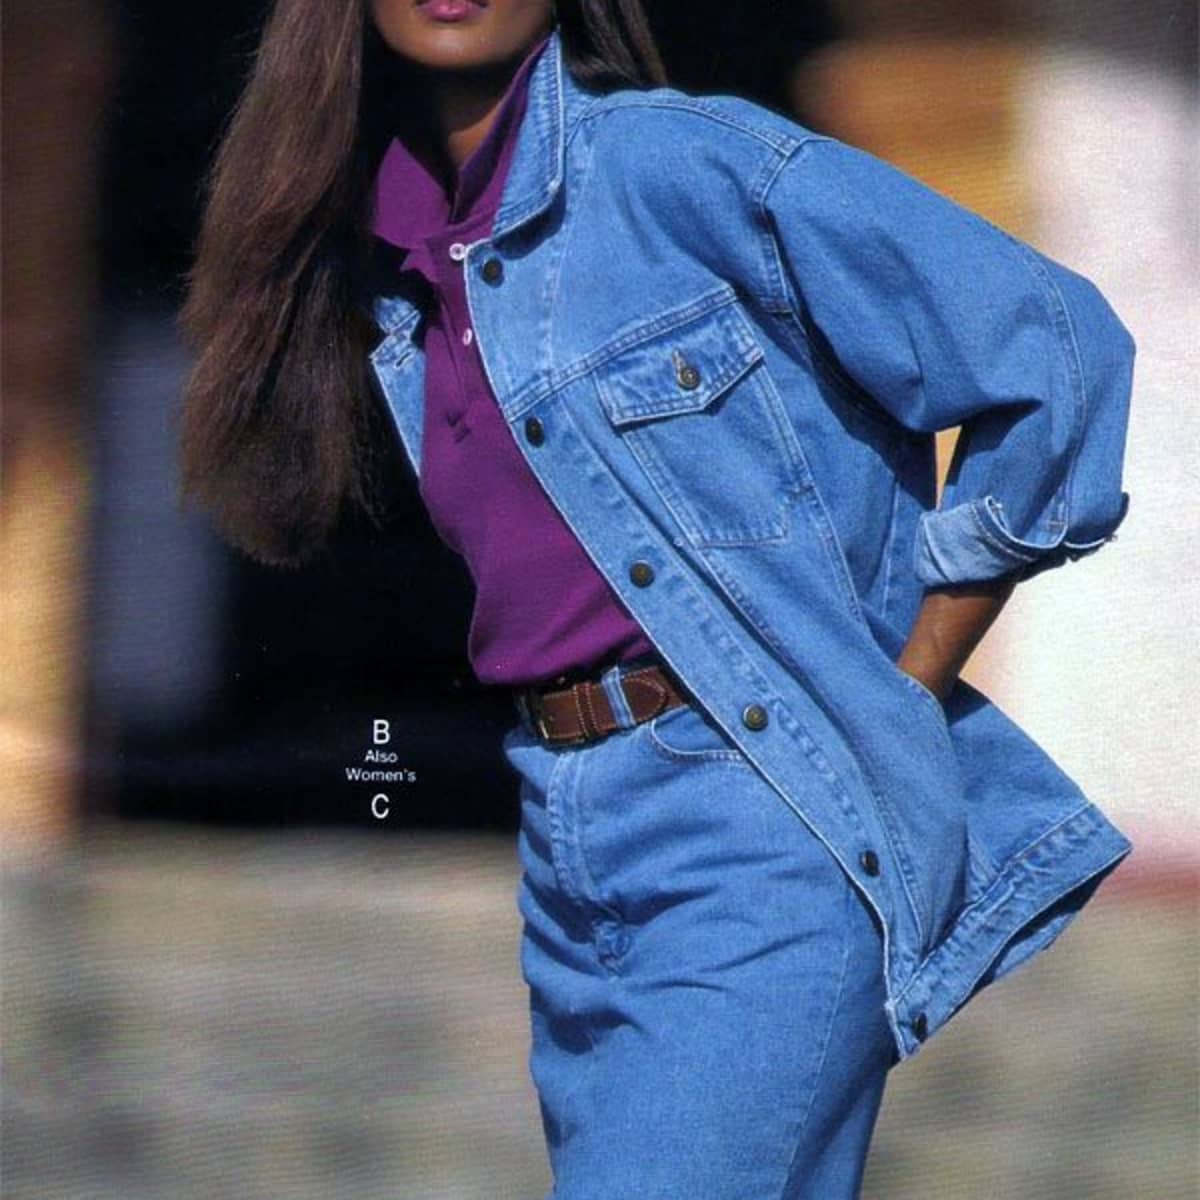 Fashion in 90s - HubPages